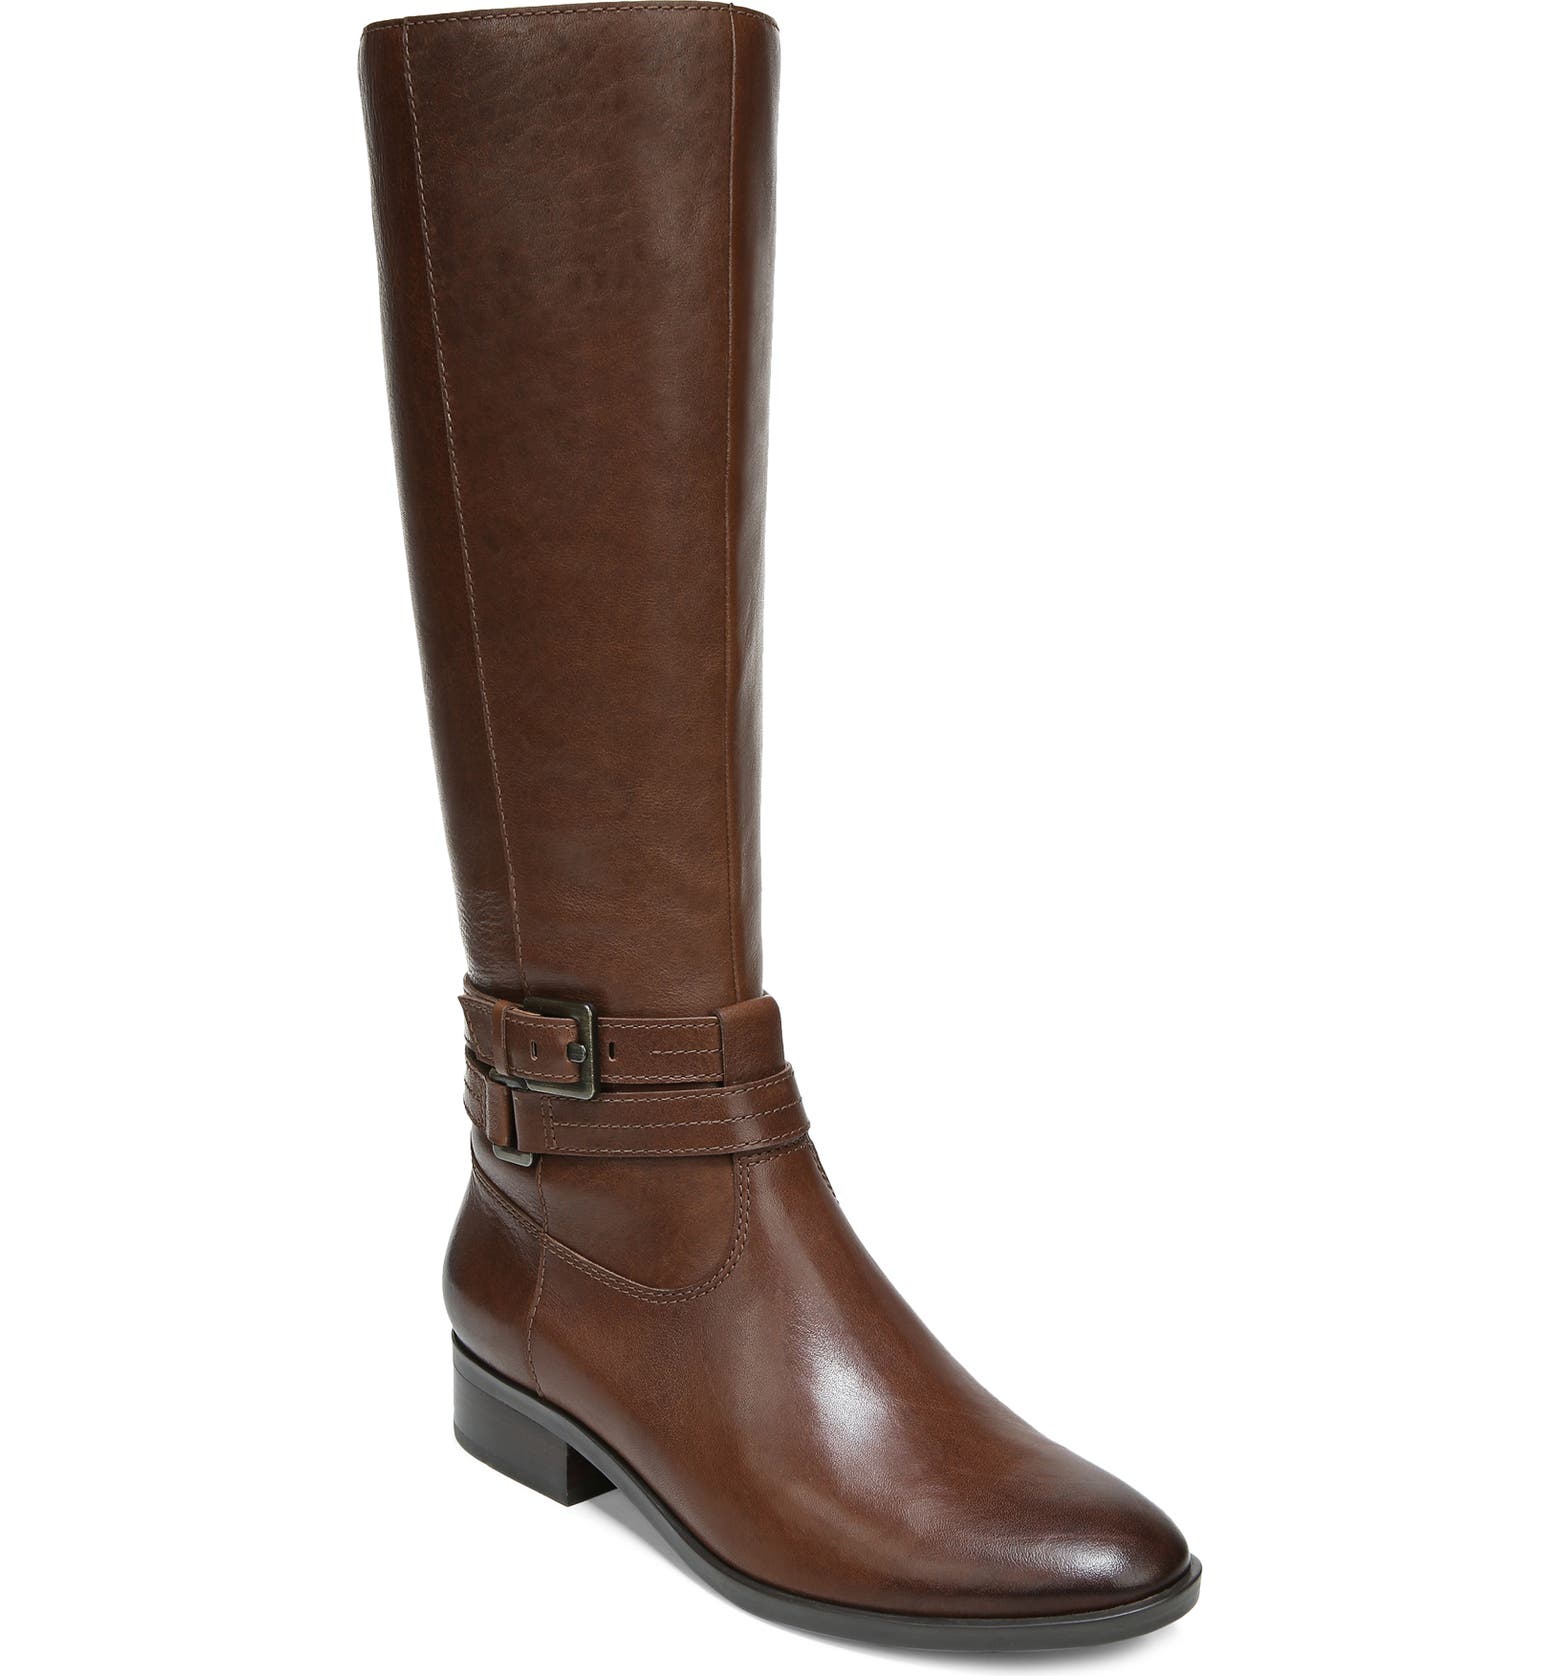 Brown equestrian style boots